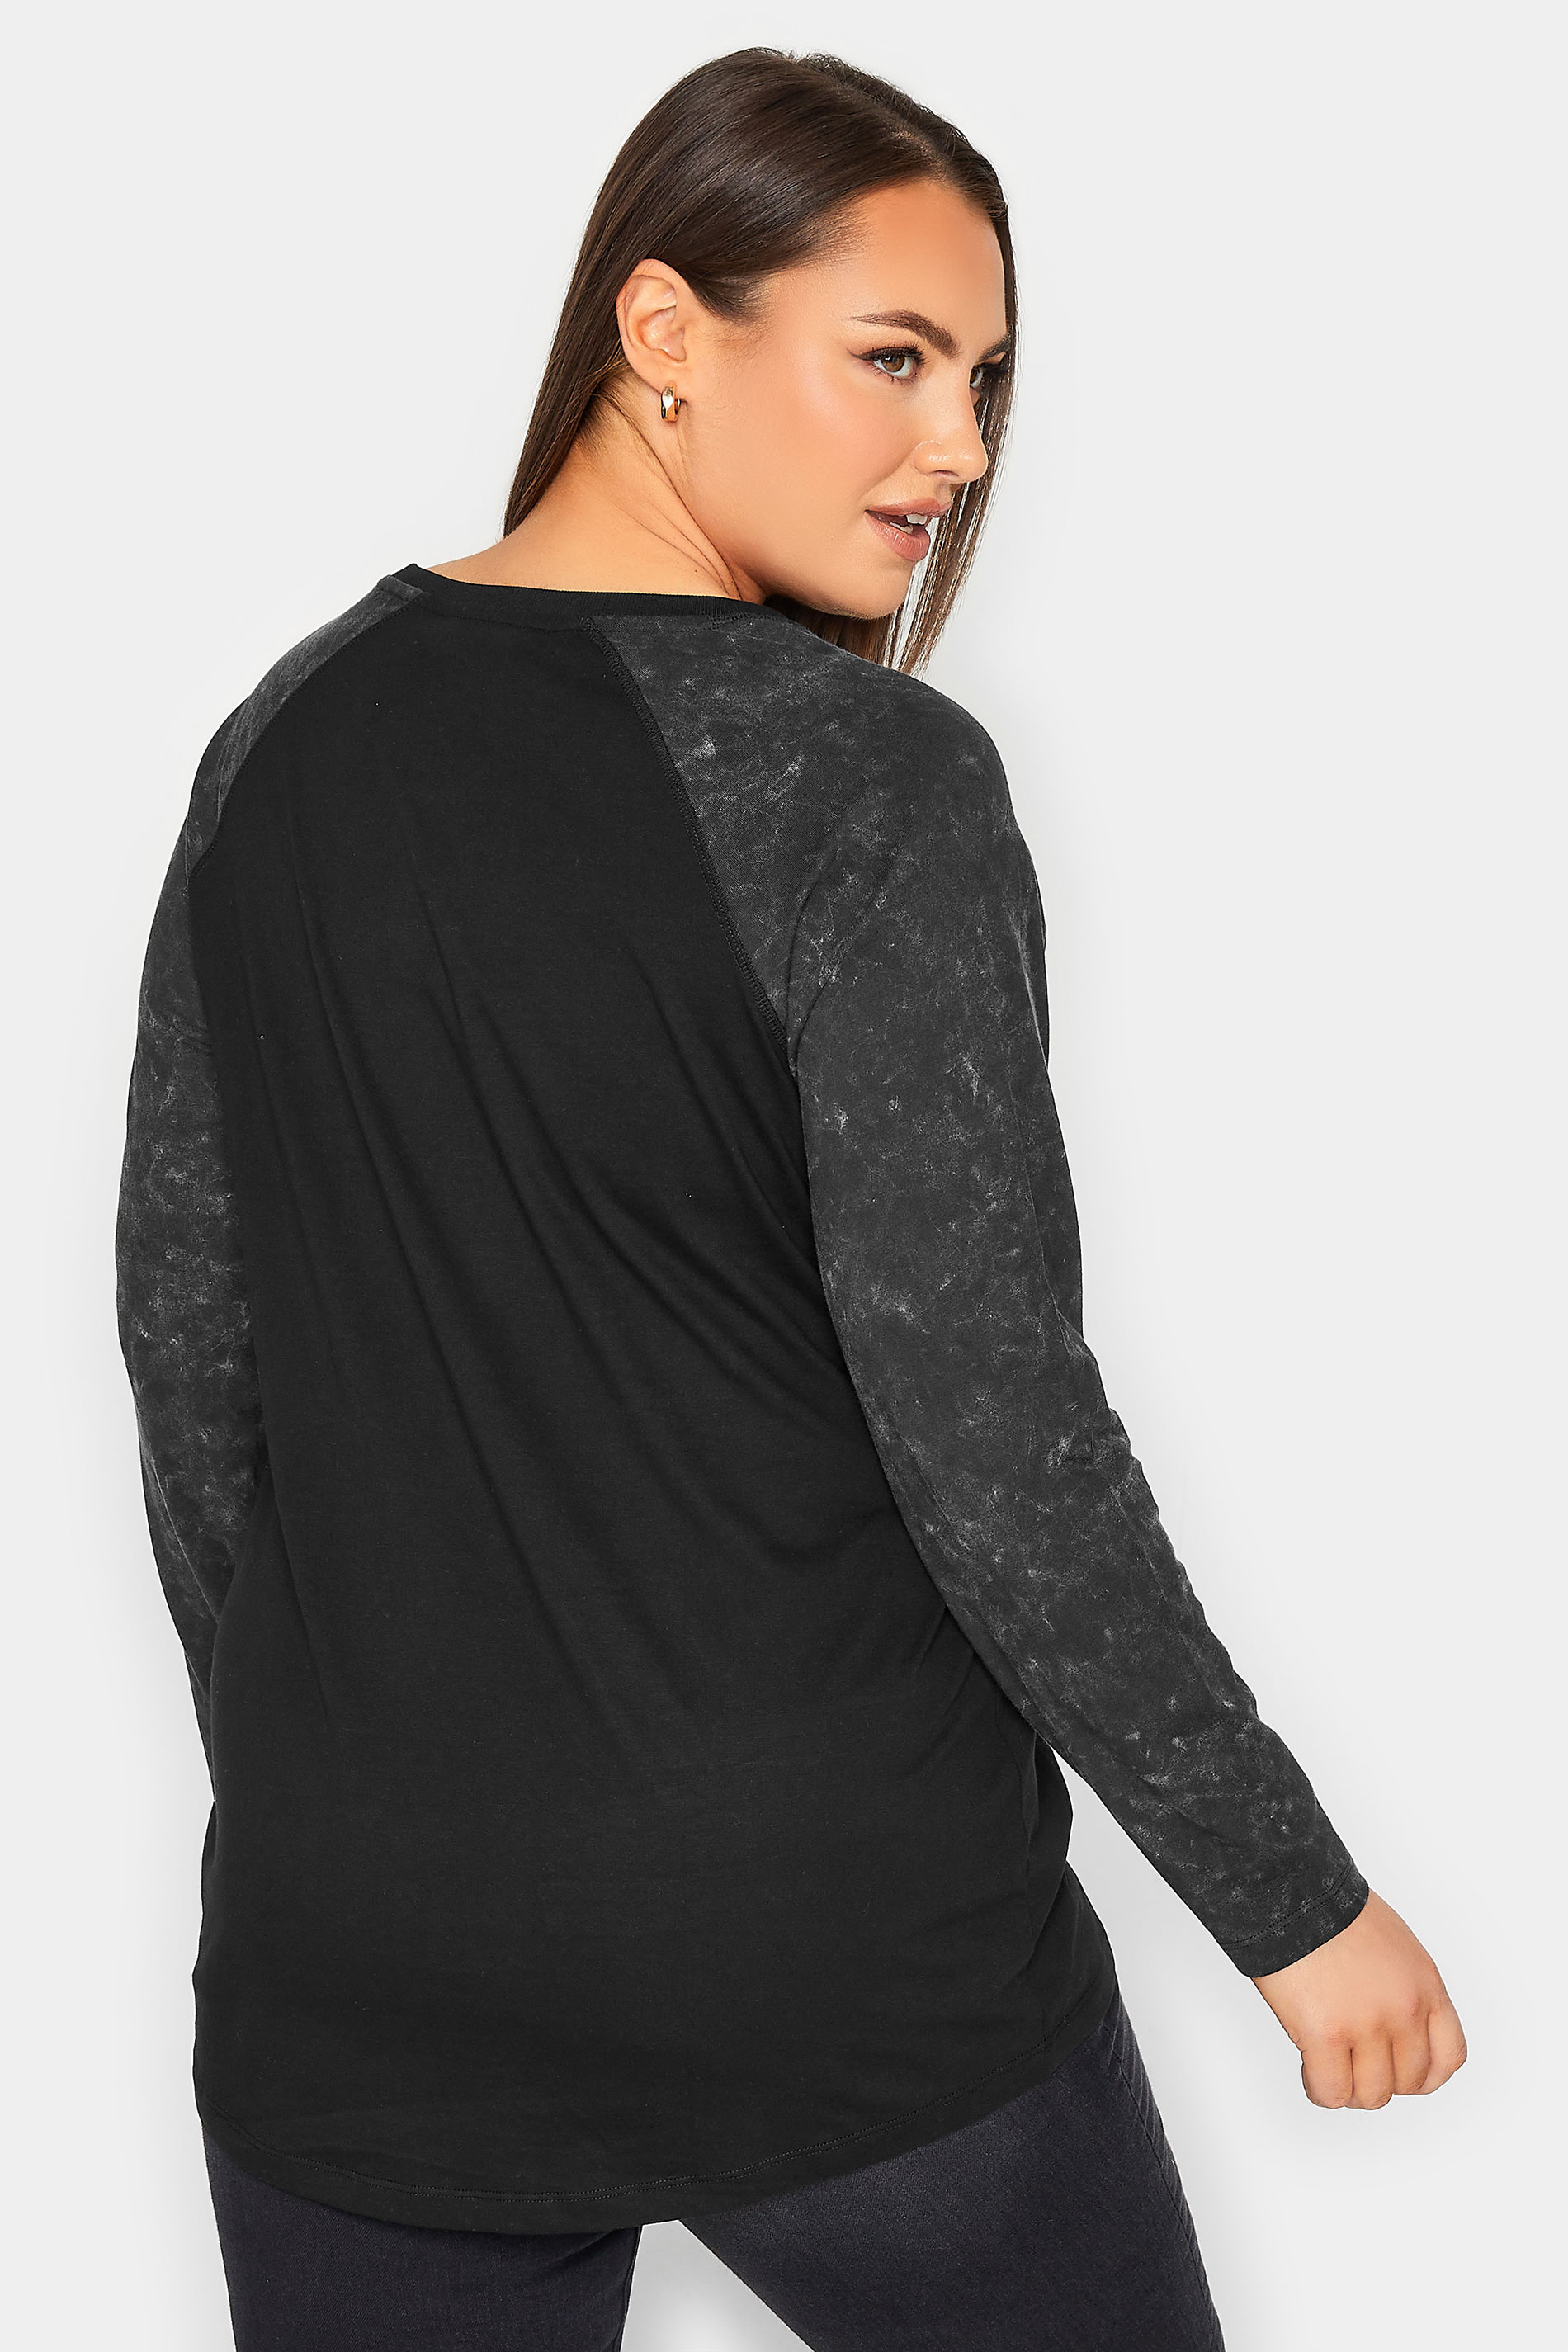 YOURS Curve Black Long Sleeve Raglan Top | Yours Clothing 3